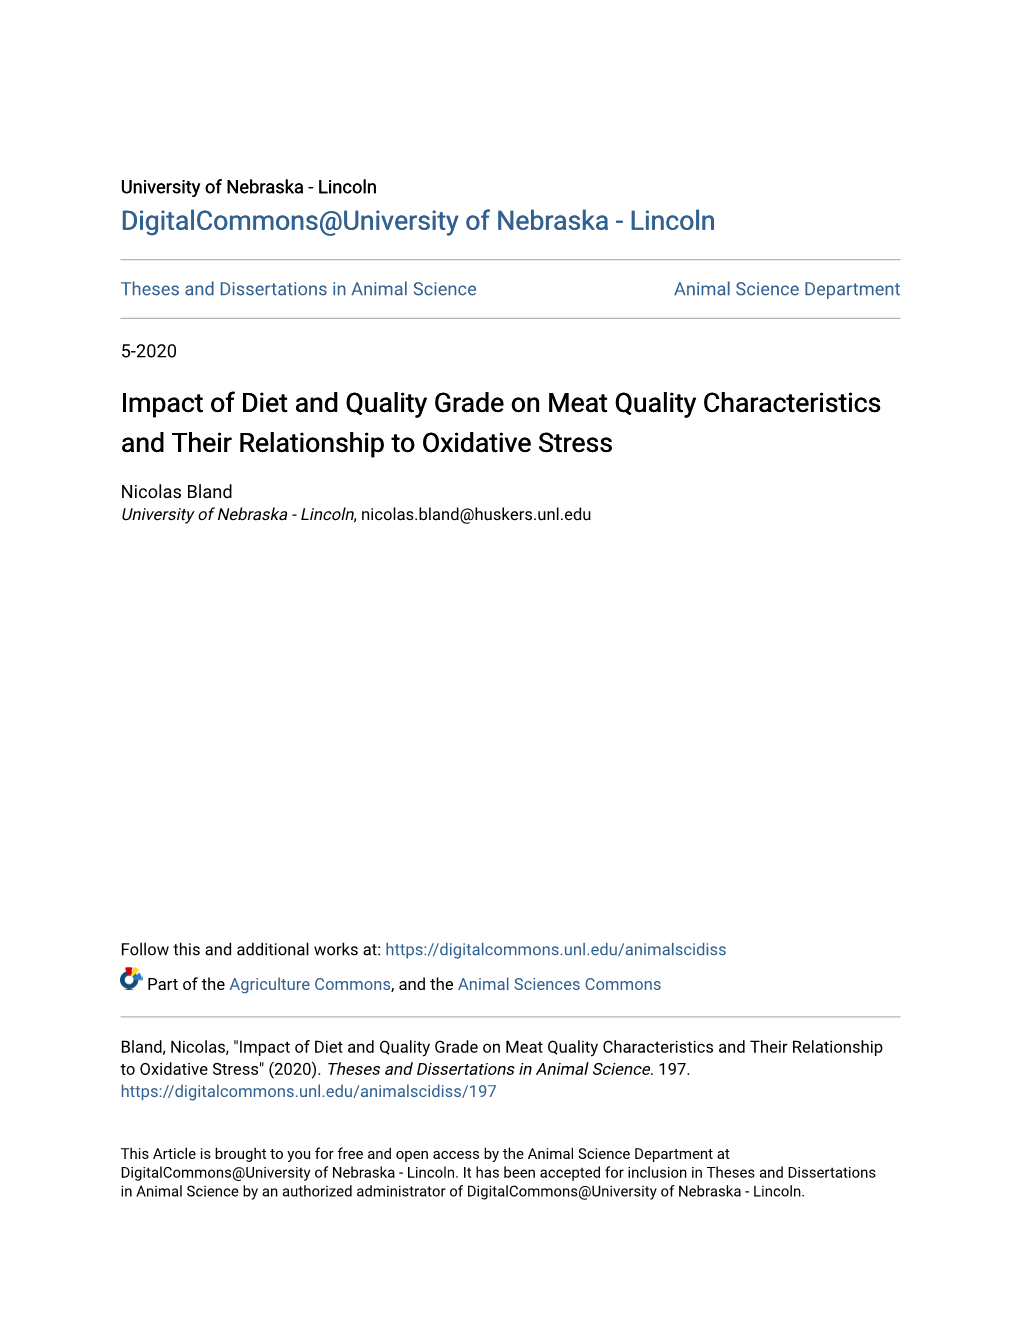 Impact of Diet and Quality Grade on Meat Quality Characteristics and Their Relationship to Oxidative Stress